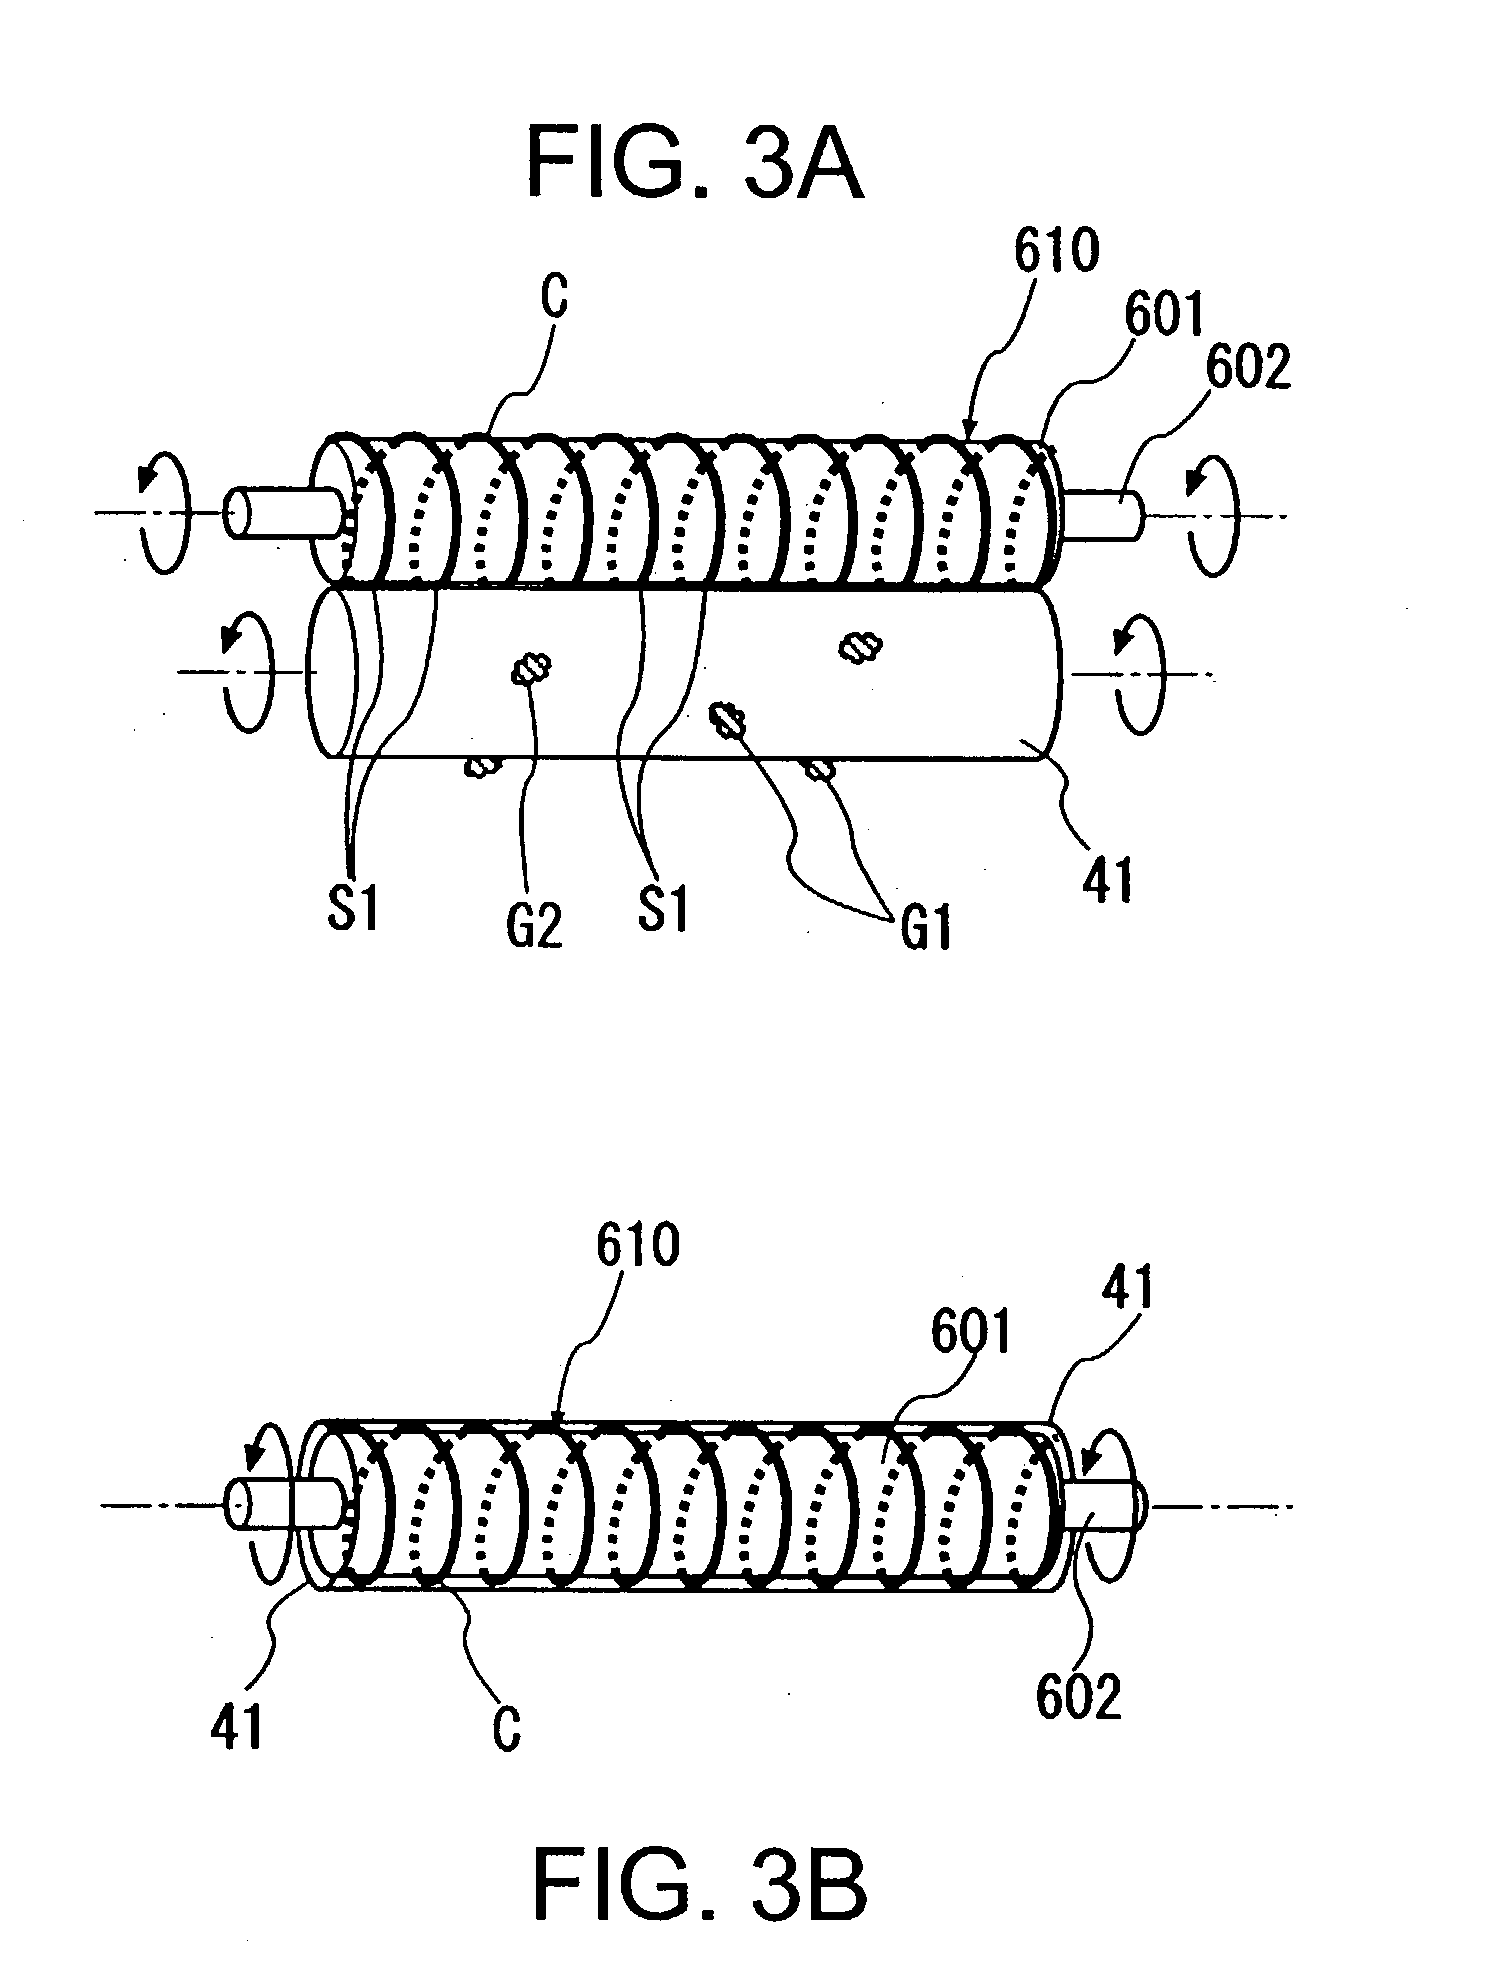 Thermal activator for heat sensitive adhesive sheet and printer apparatus utilizing the thermal activator